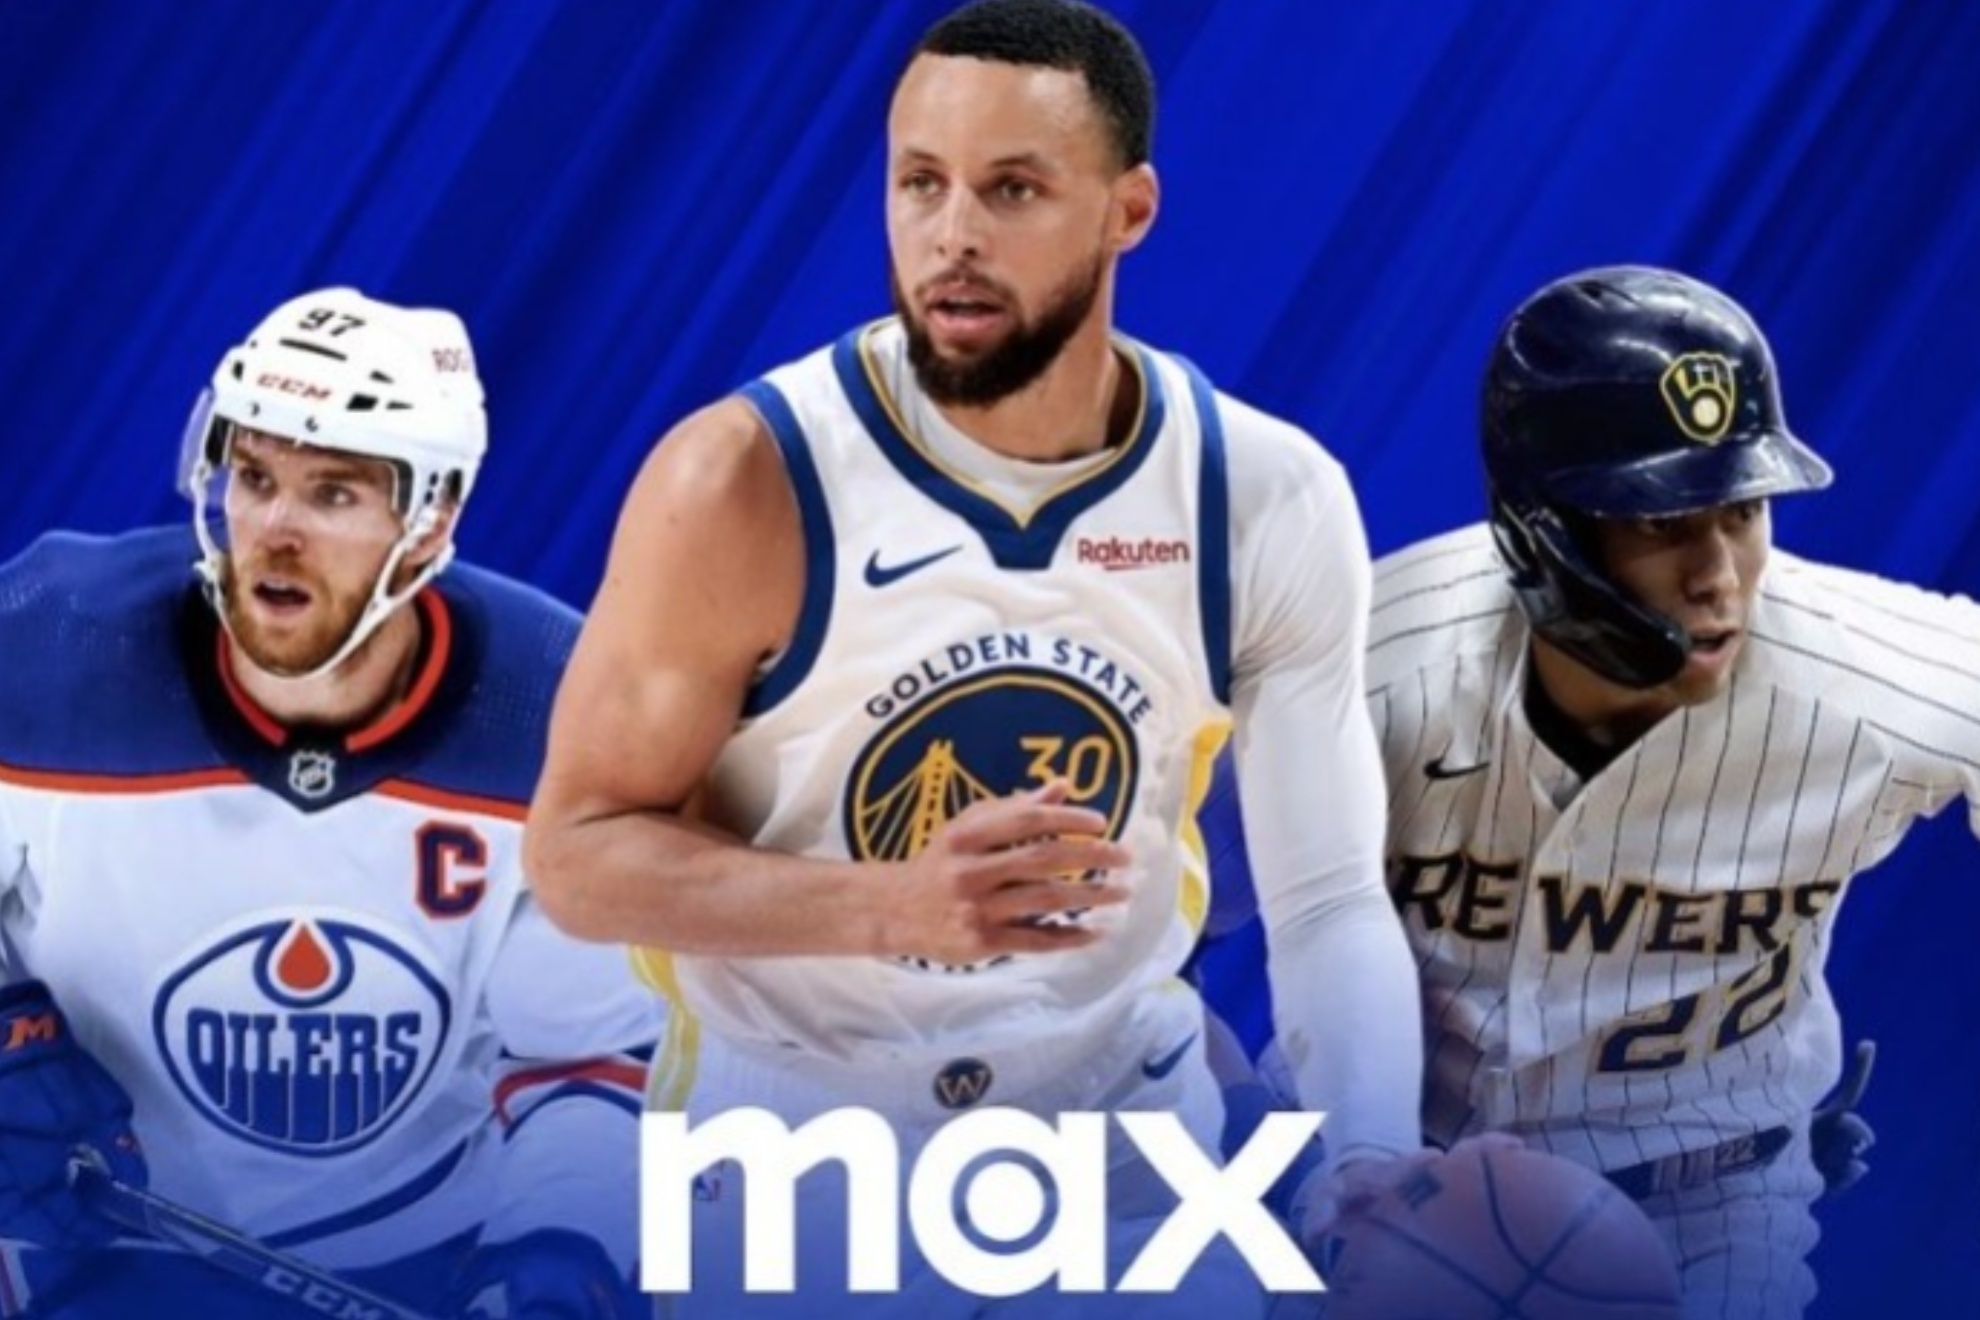 Max streaming platform will offer Live sports starting in October